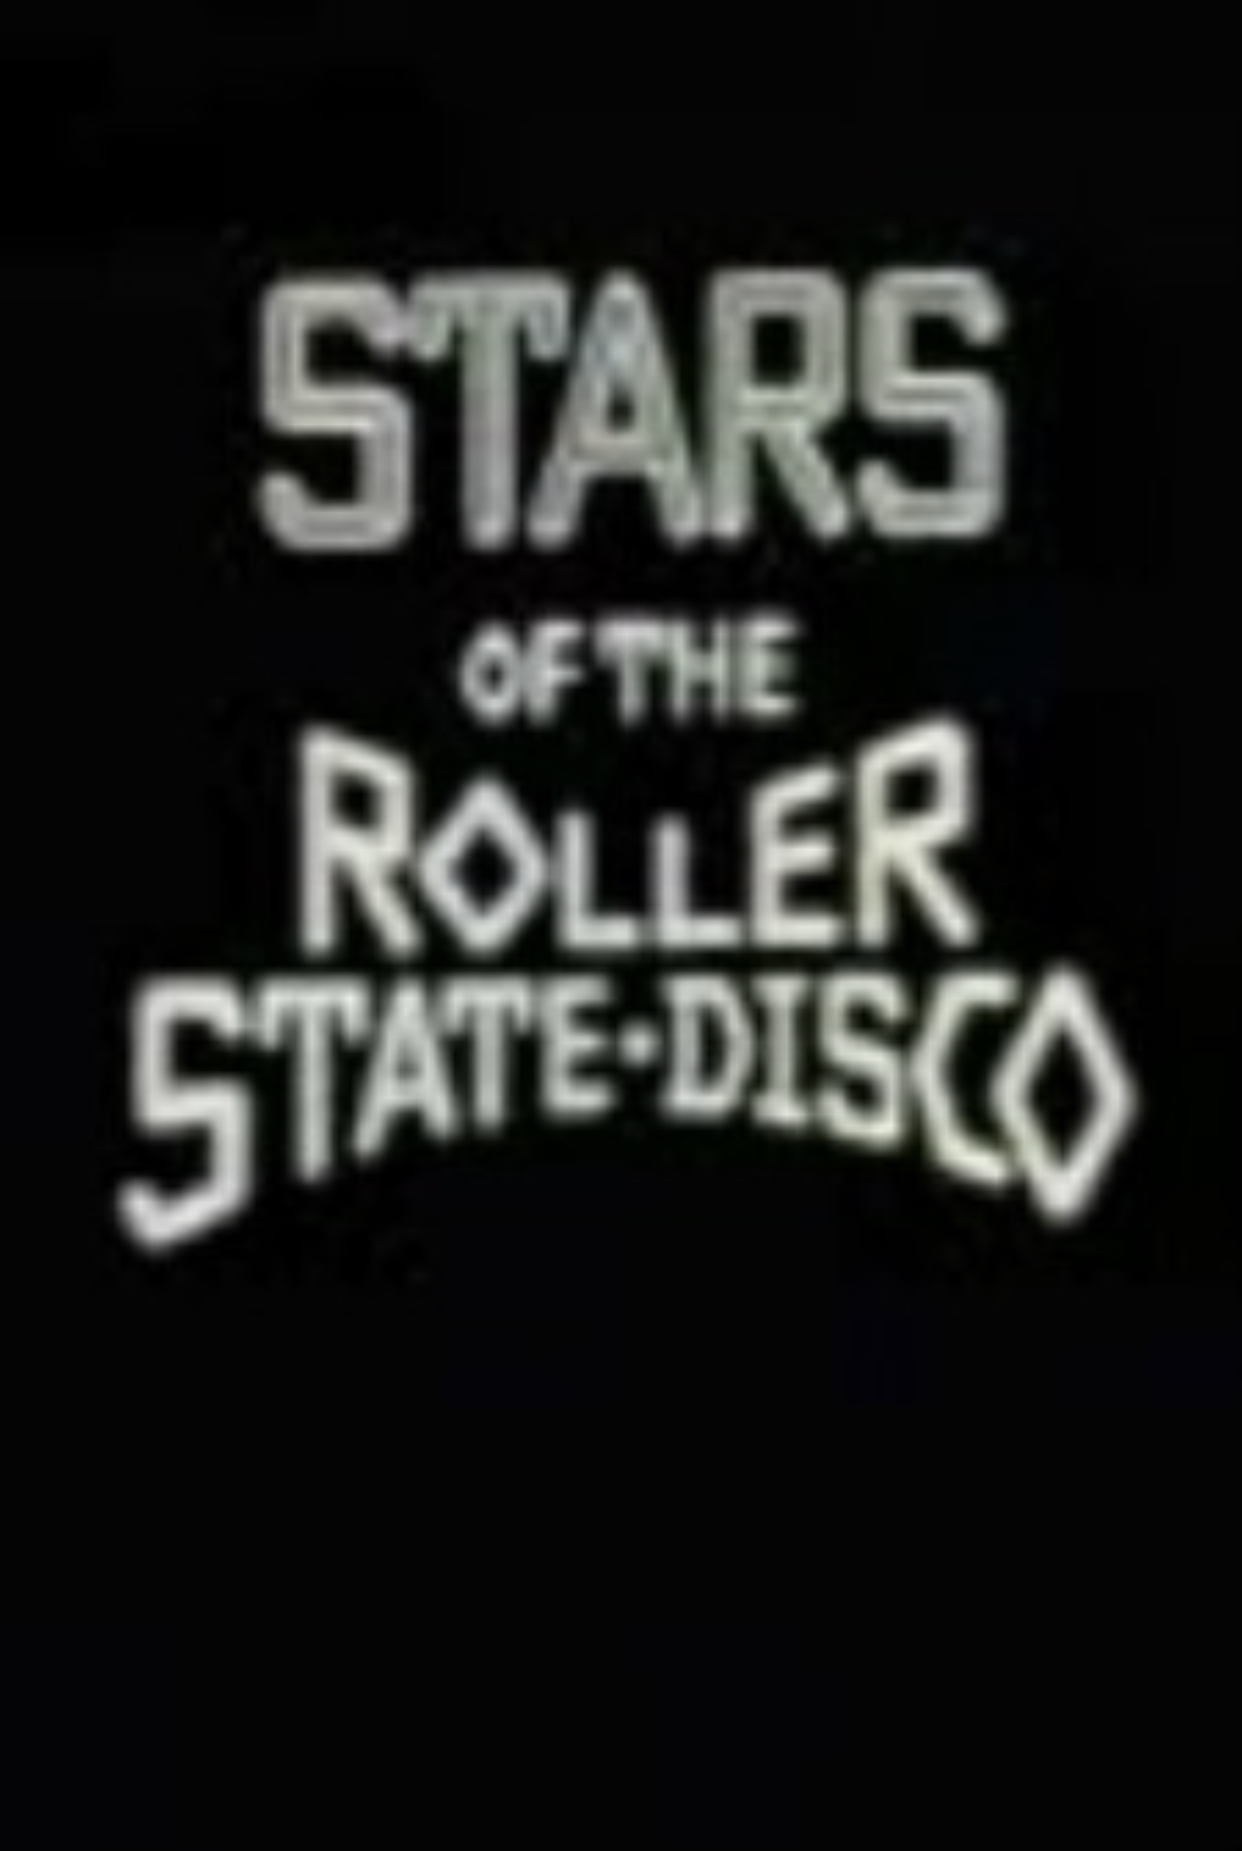 Stars of the Roller State Disco (1984) Screenshot 2 